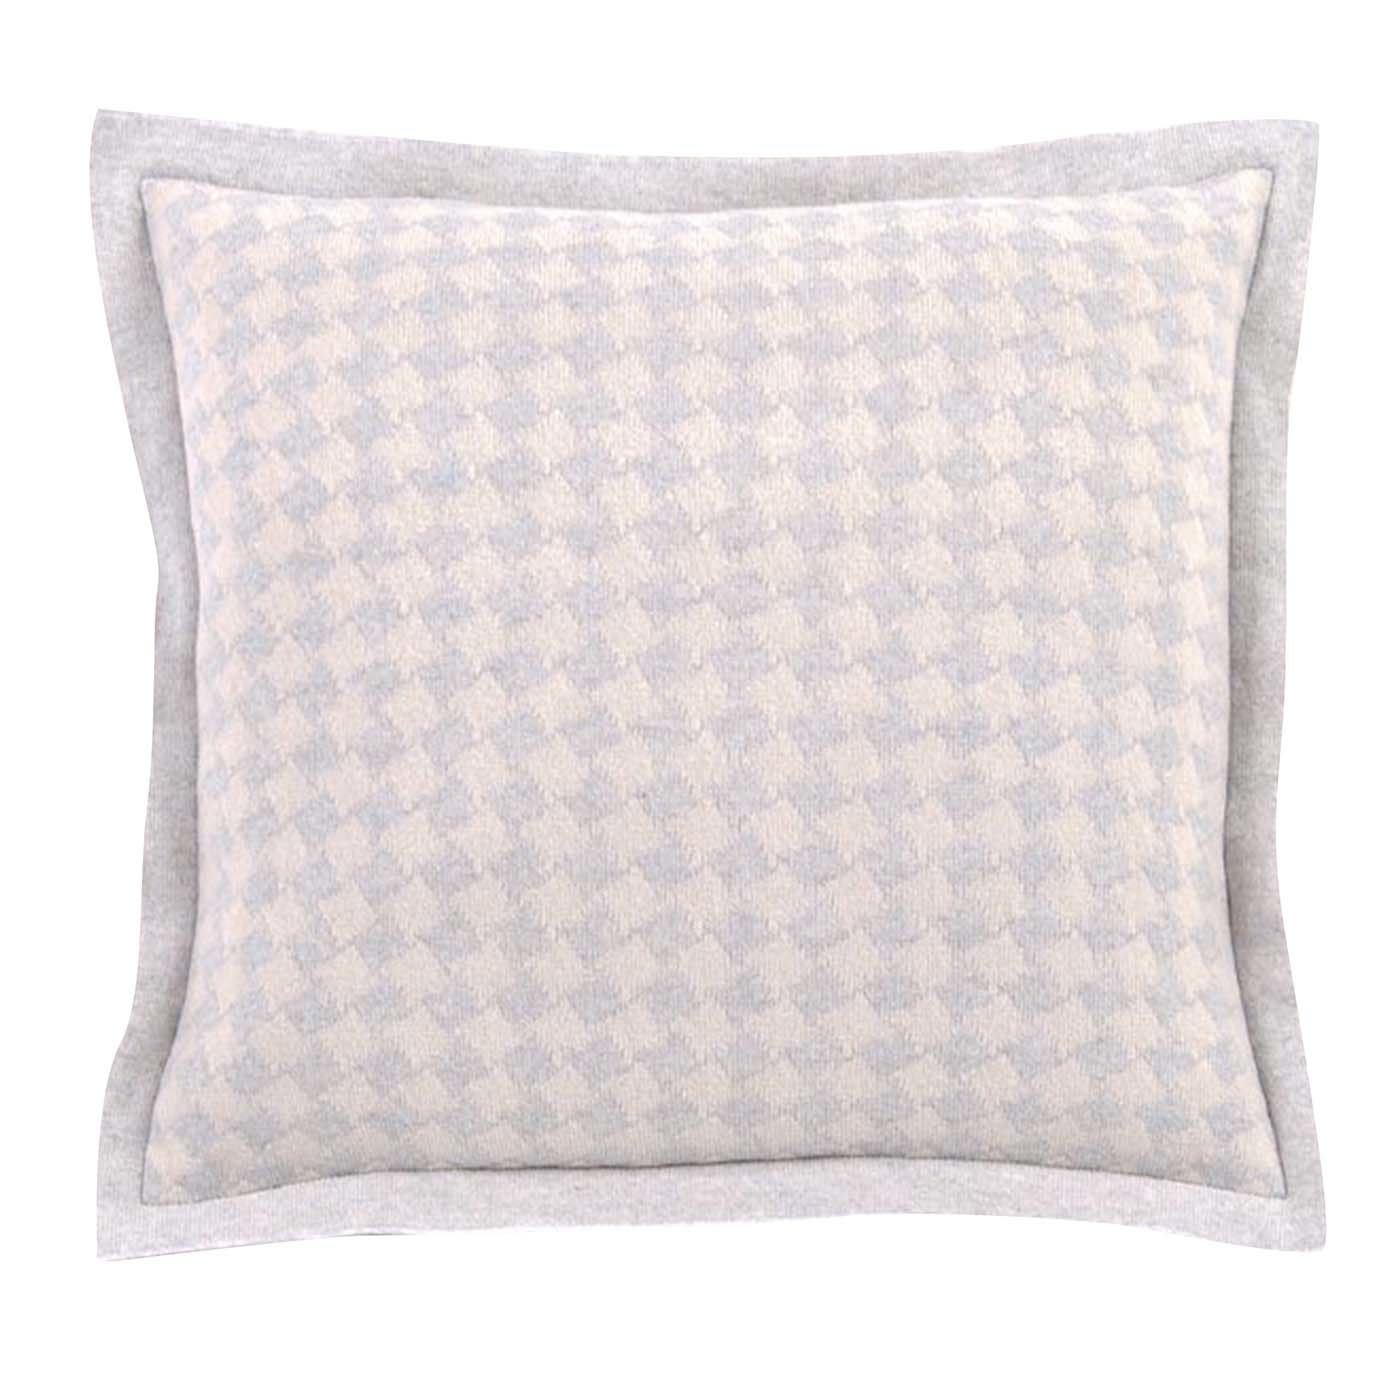 Cushion with Small Pied de Poule Pattern - Roberta Licini